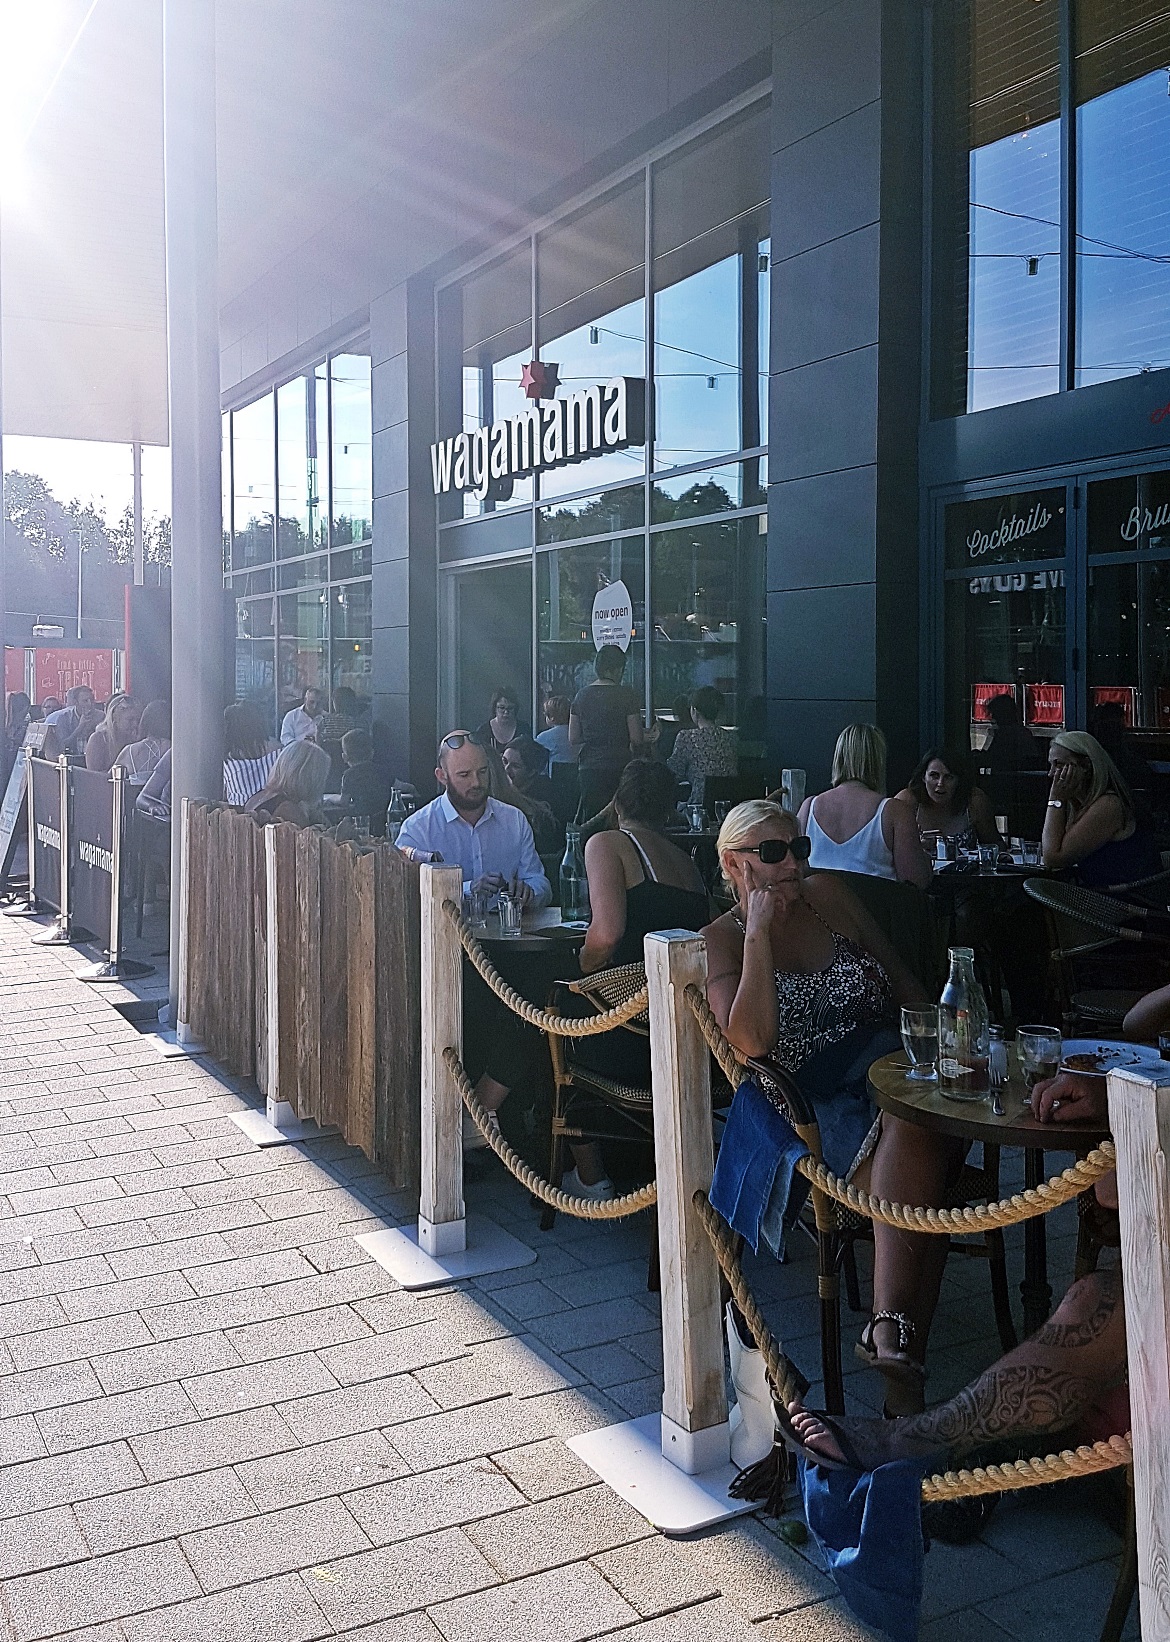 The exterior of Wagamama in the Village at White Rose Leeds - Wagamama Menu Pairing, Review by BeckyBecky Blogs